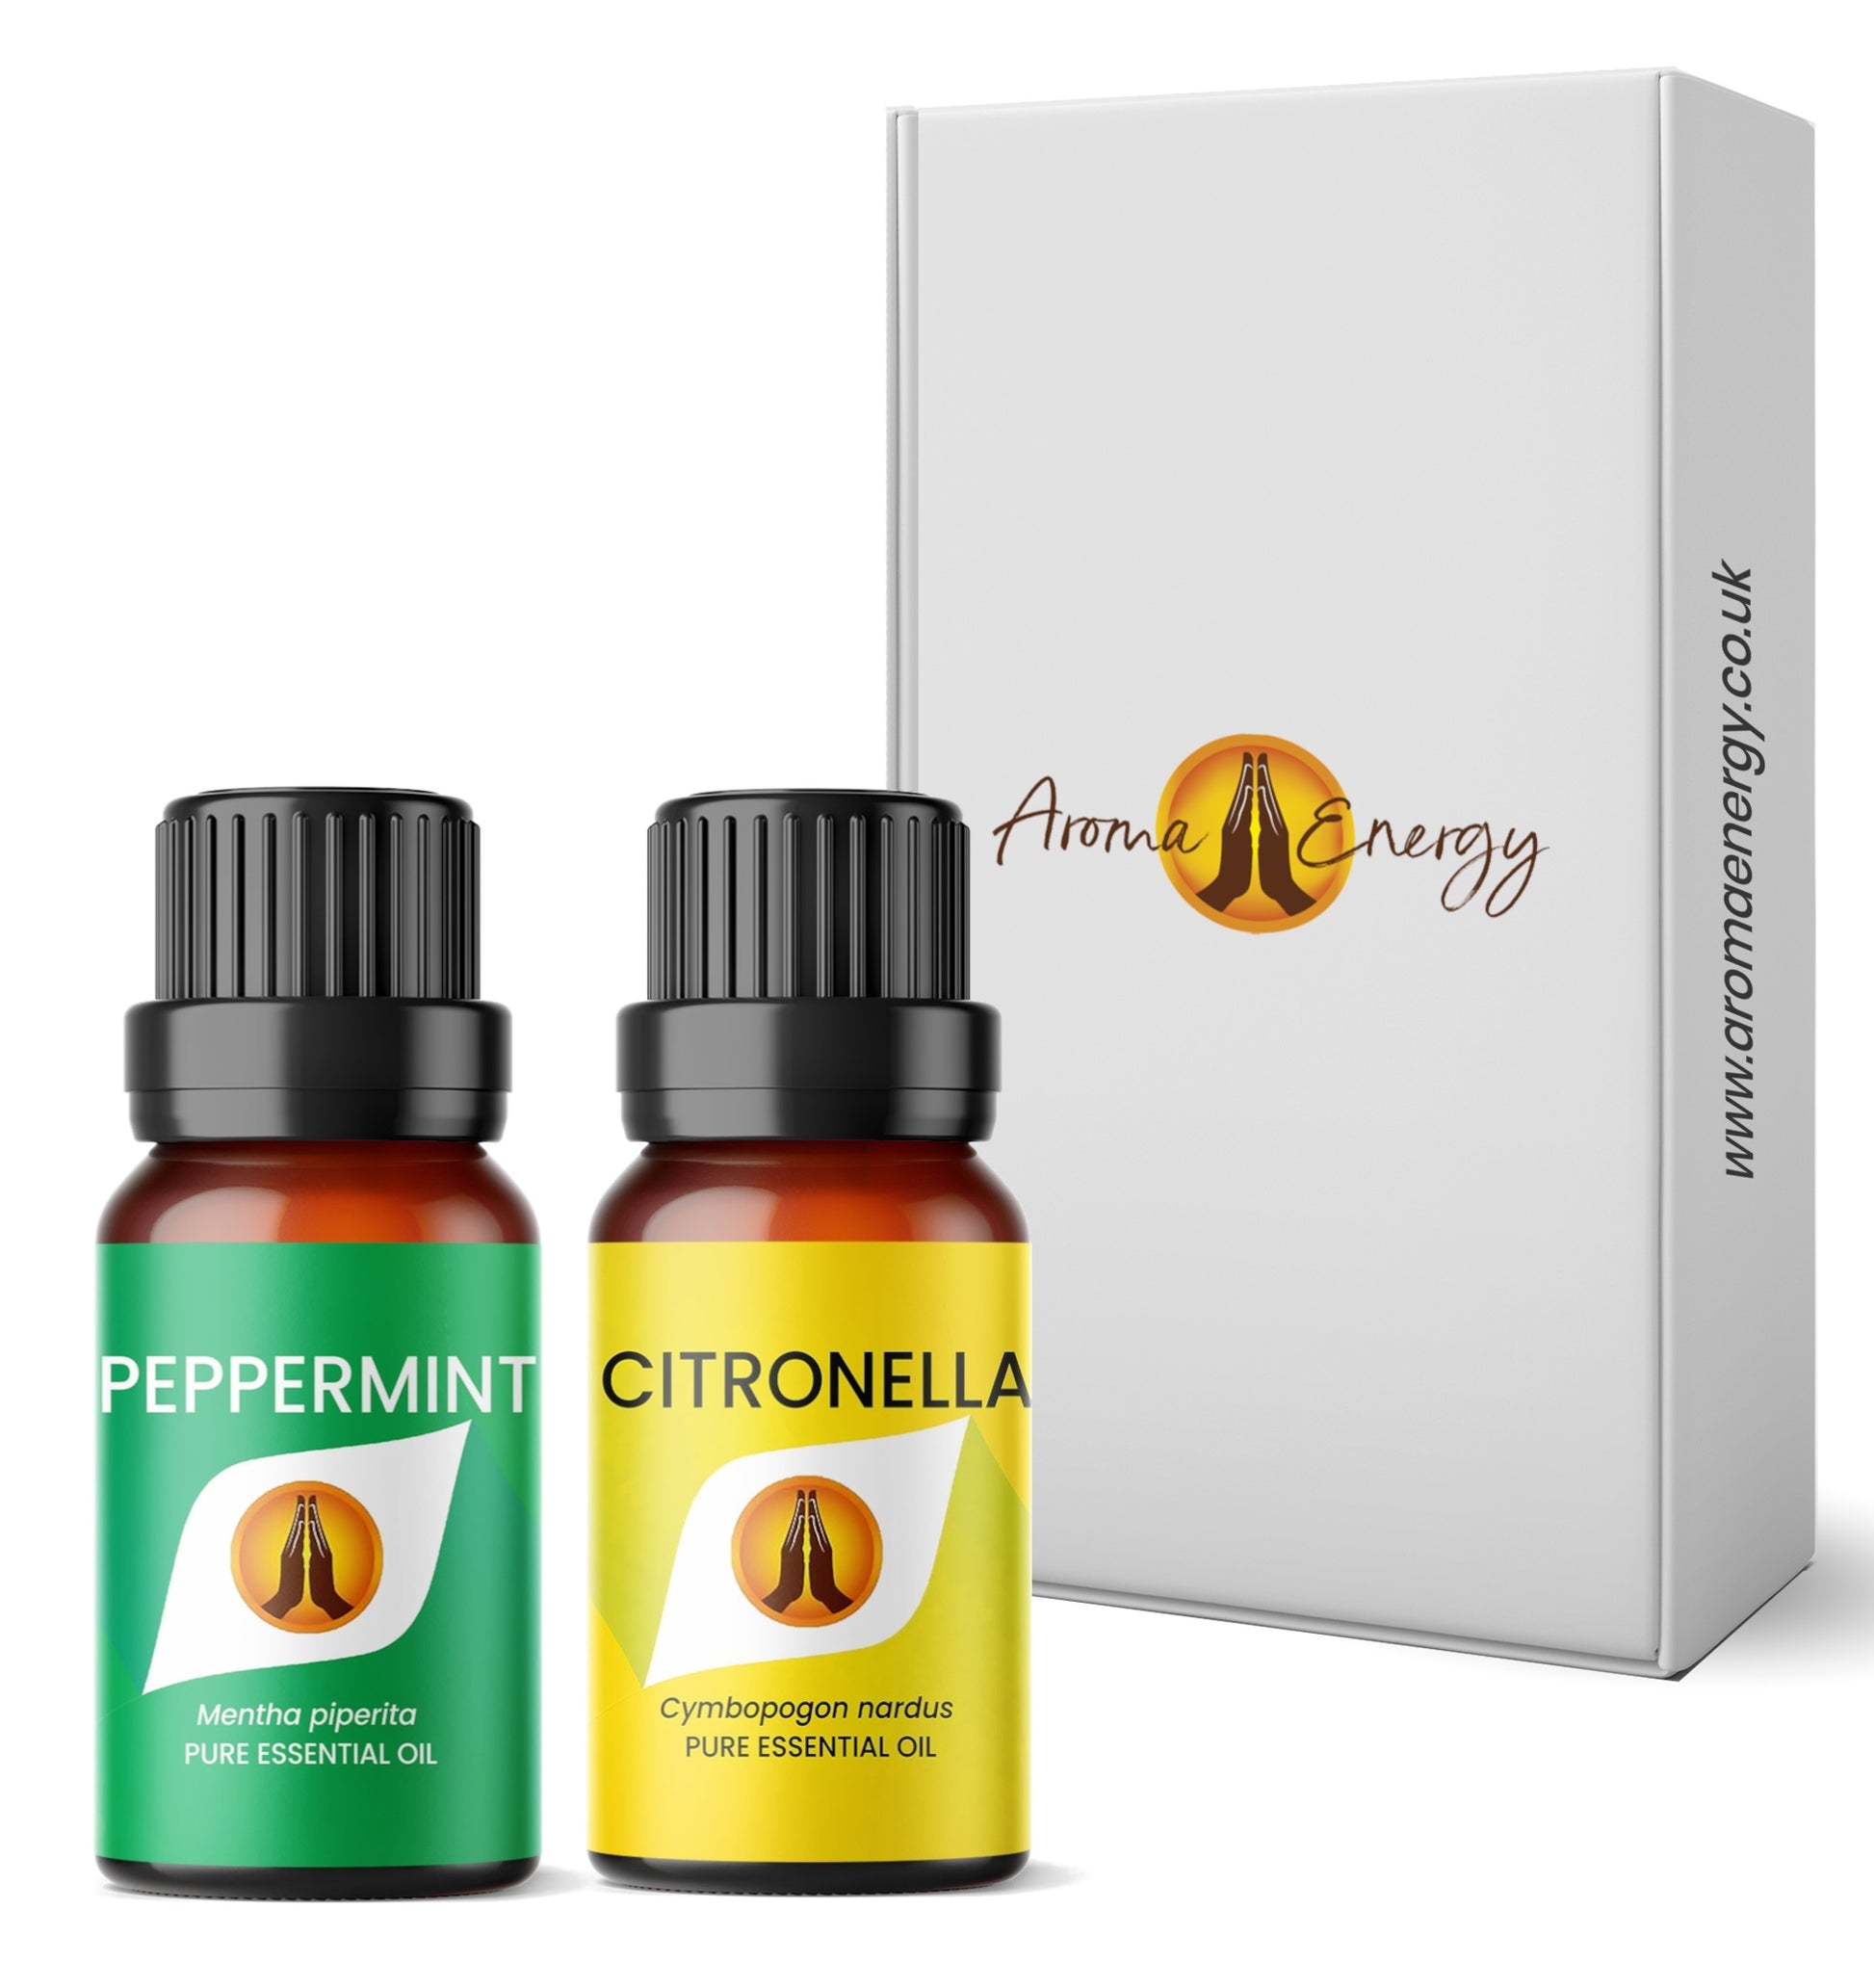 Peppermint & Citronella Essential Oil Aromatherapy Gift Box - Aroma Energy